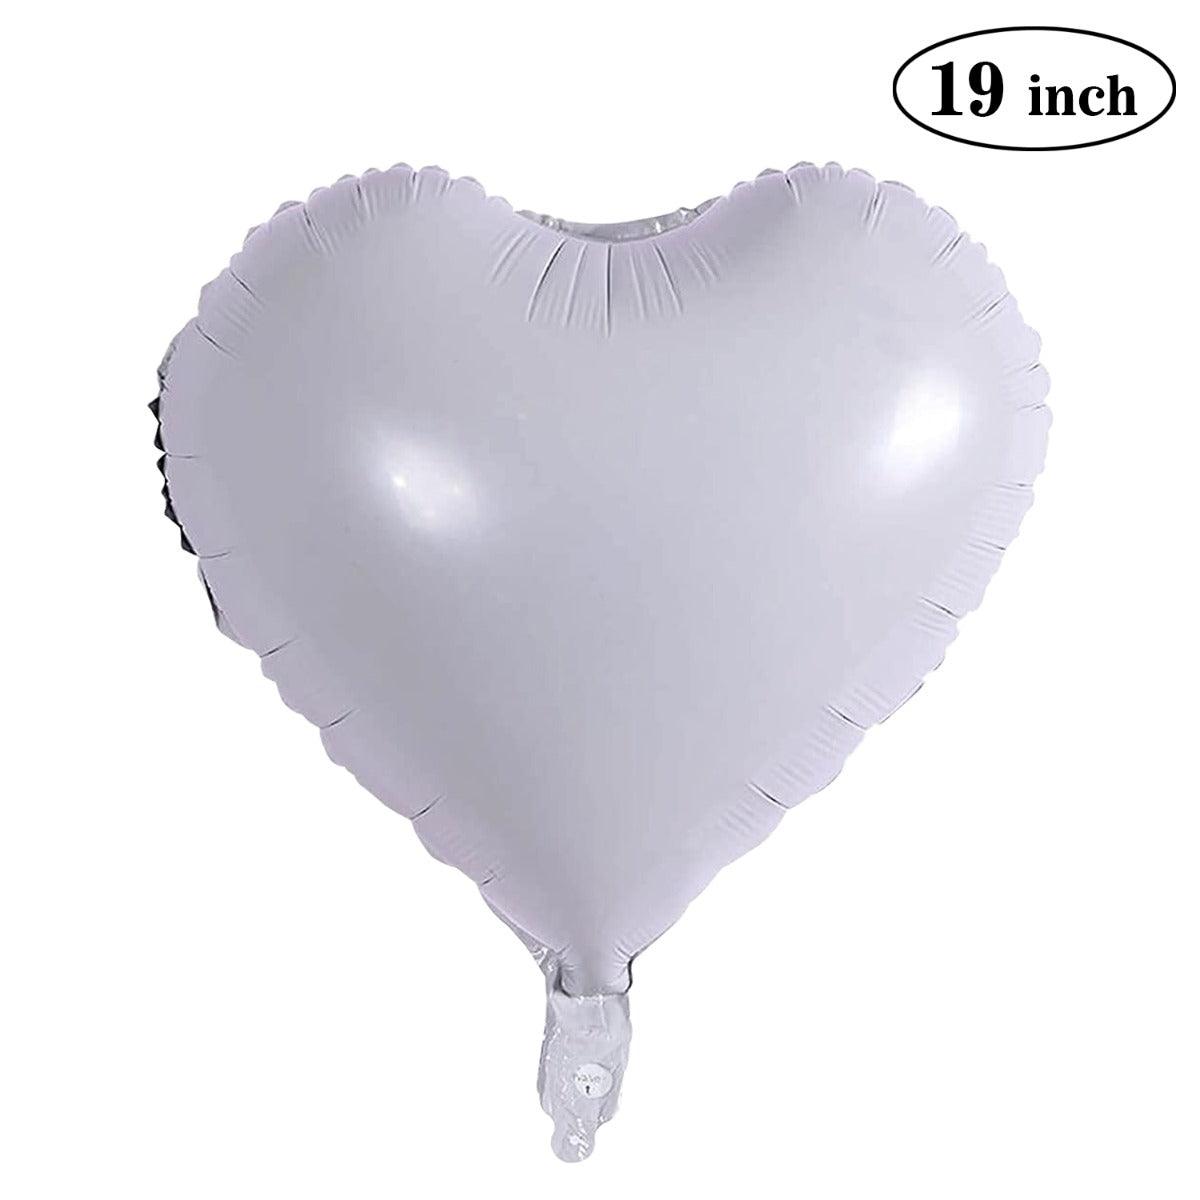 PartyCorp 19 Inch White Heart Foil Balloon, 1 pc